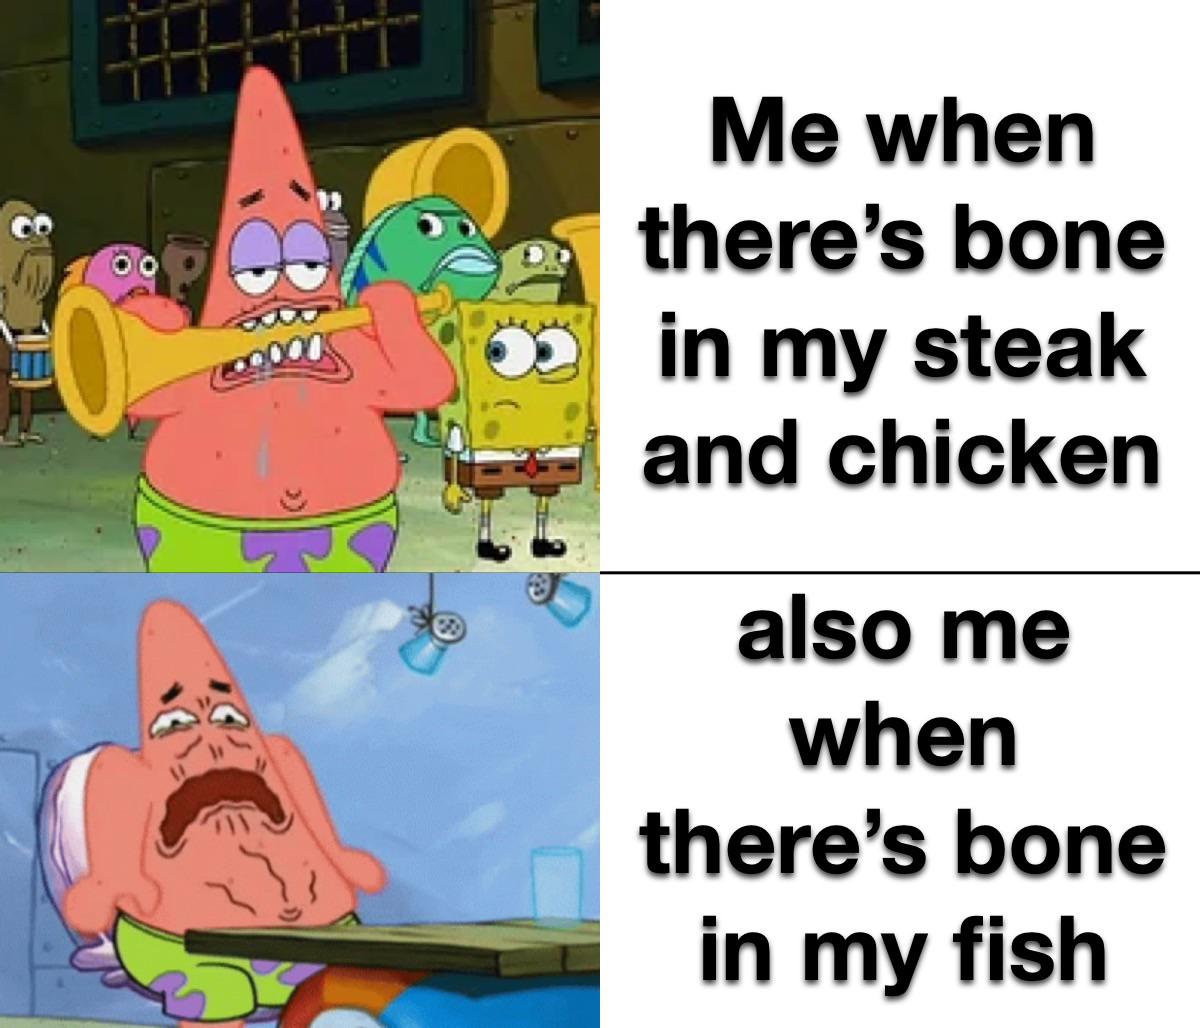 cartoon - Me when there's bone in my steak and chicken 00000 also me when there's bone in my fish